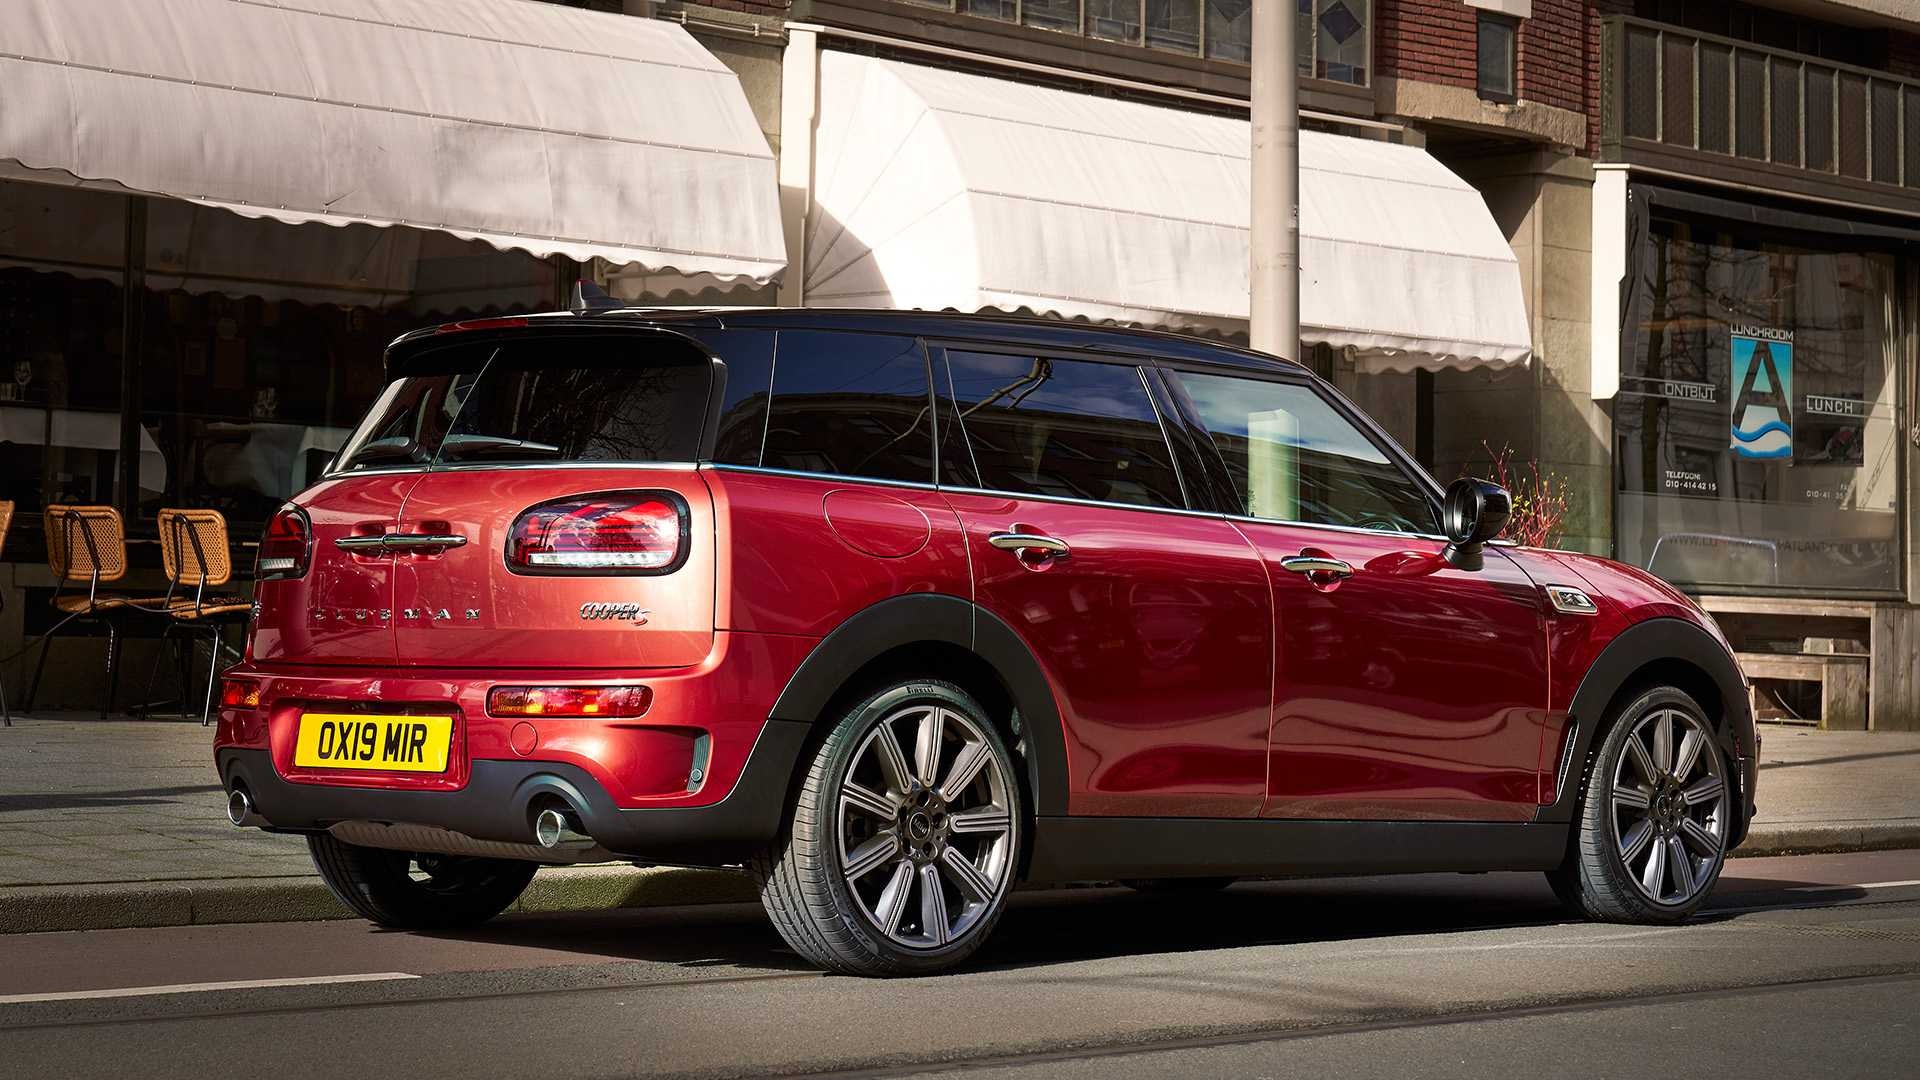 MINI Clubman, Facelifted design, Iconic Union Jack taillights, Modern and trendy, 1920x1080 Full HD Desktop